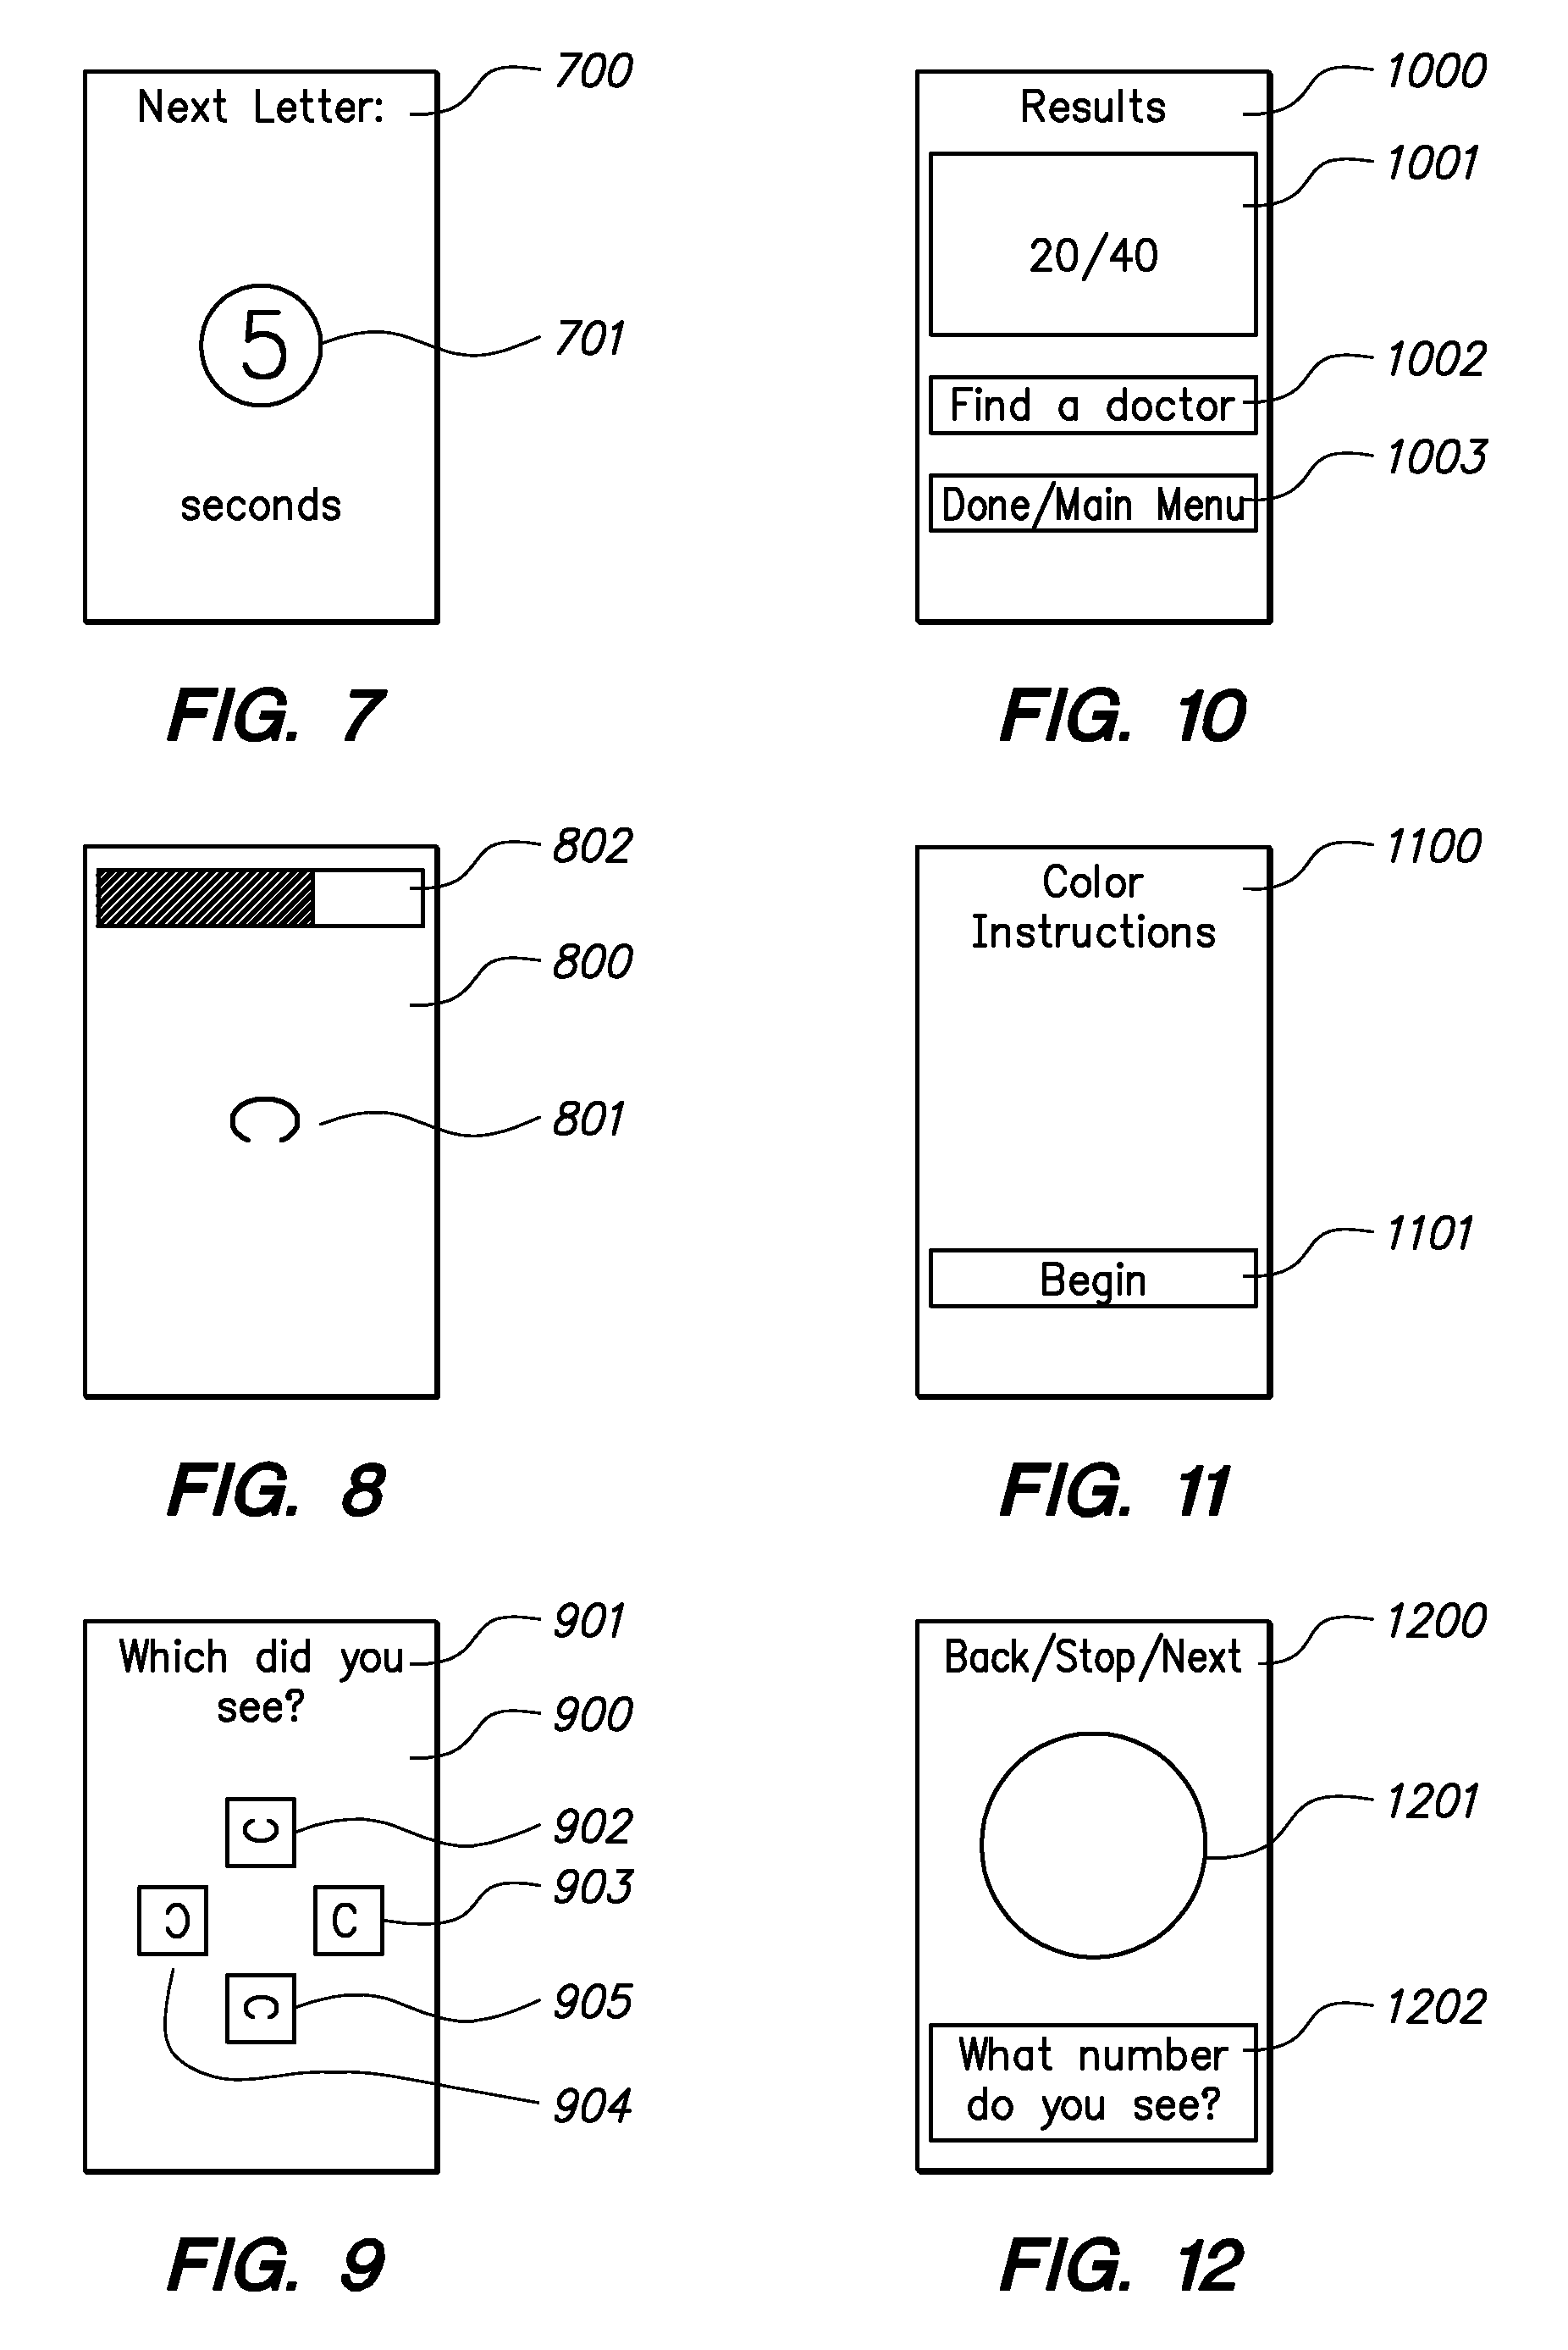 Method and system for self-administering a visual examination using a mobile computing device